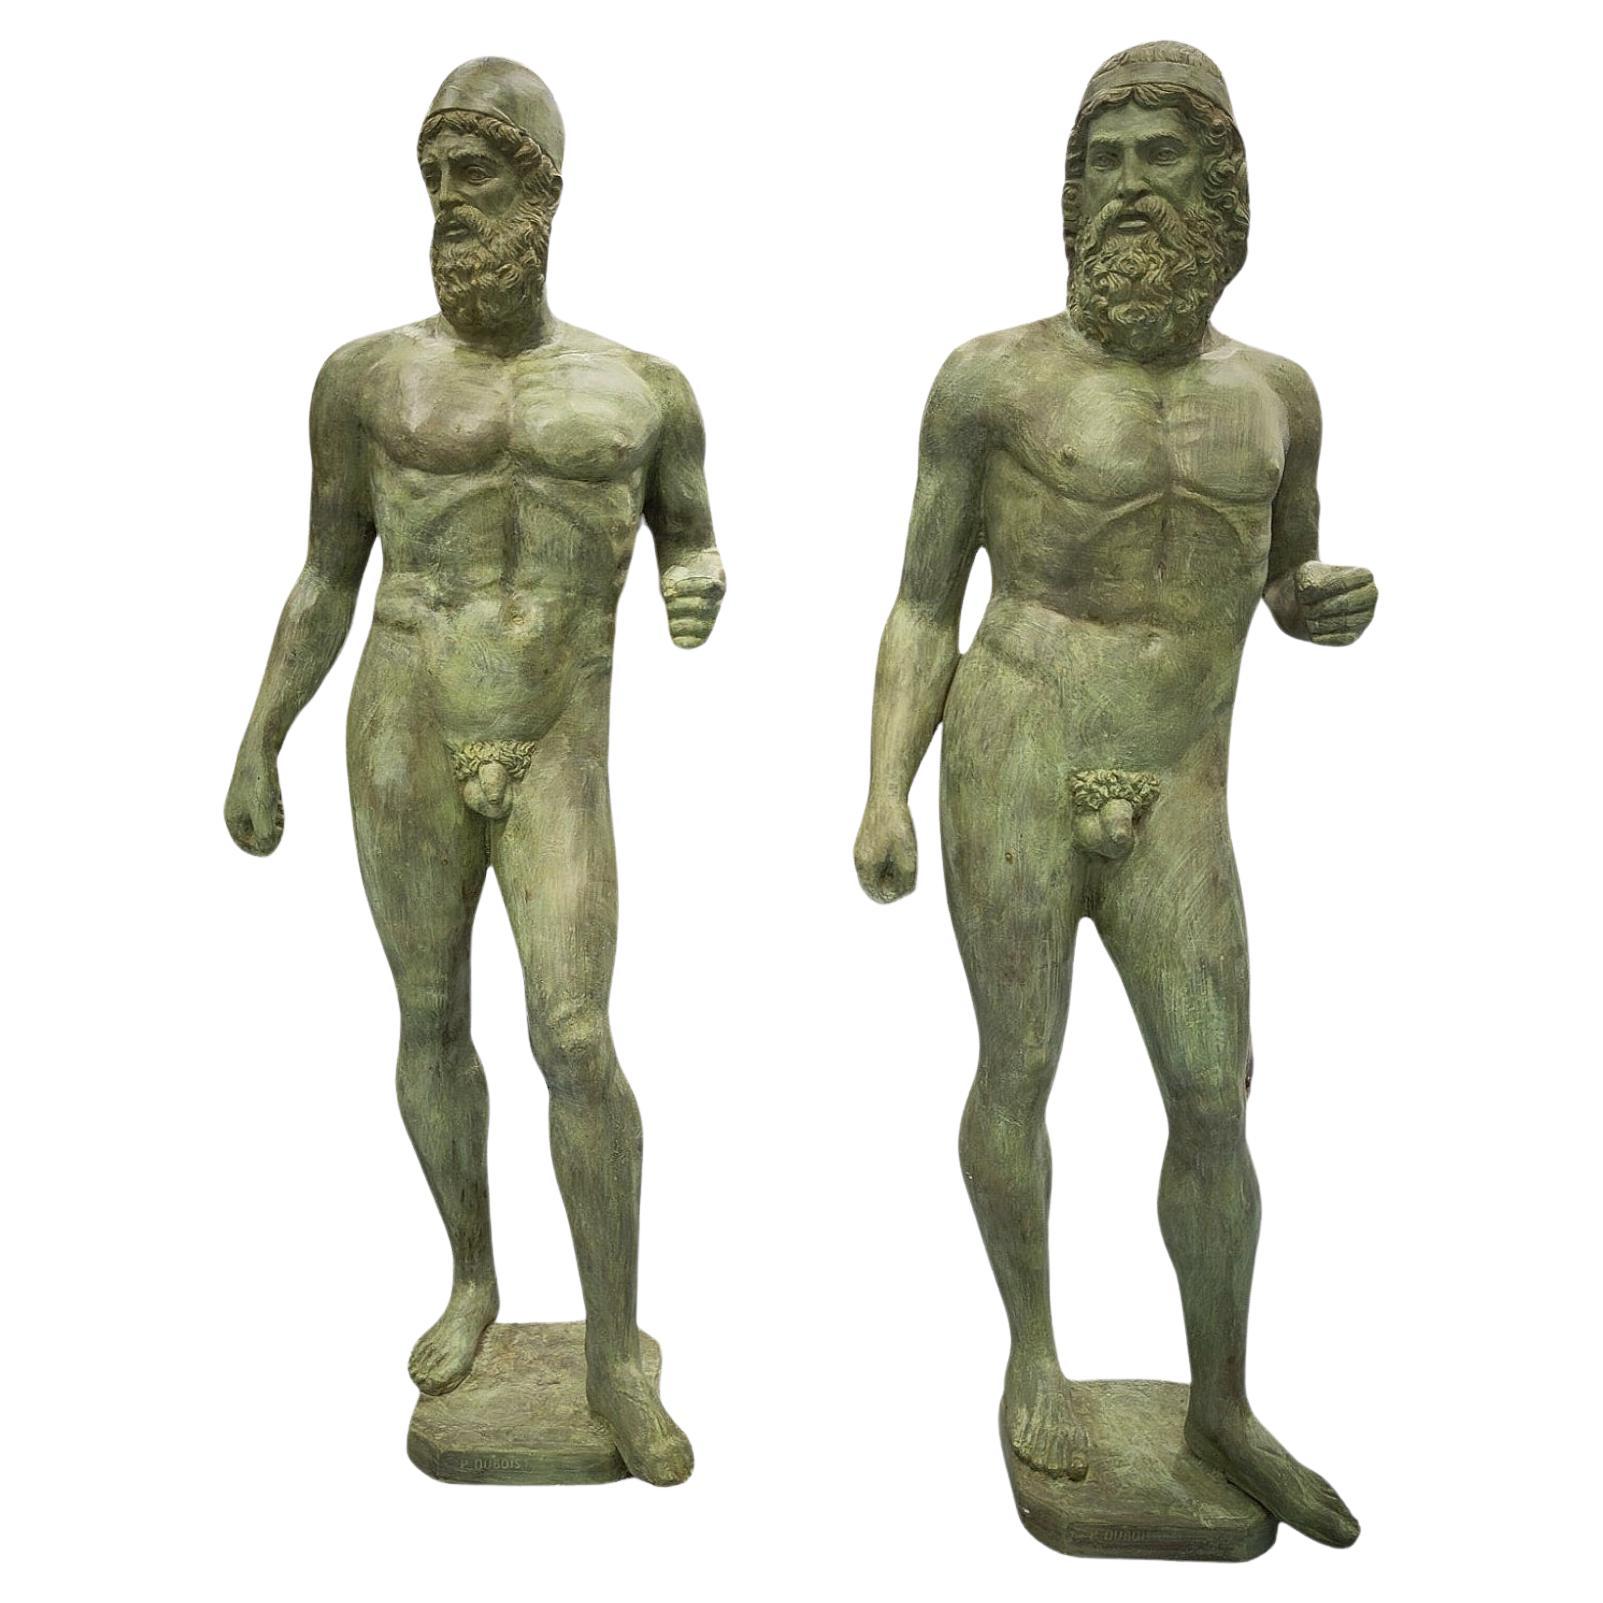 Pair of Life-size Bronze Sculptures of the Riace Warriors 200 CM